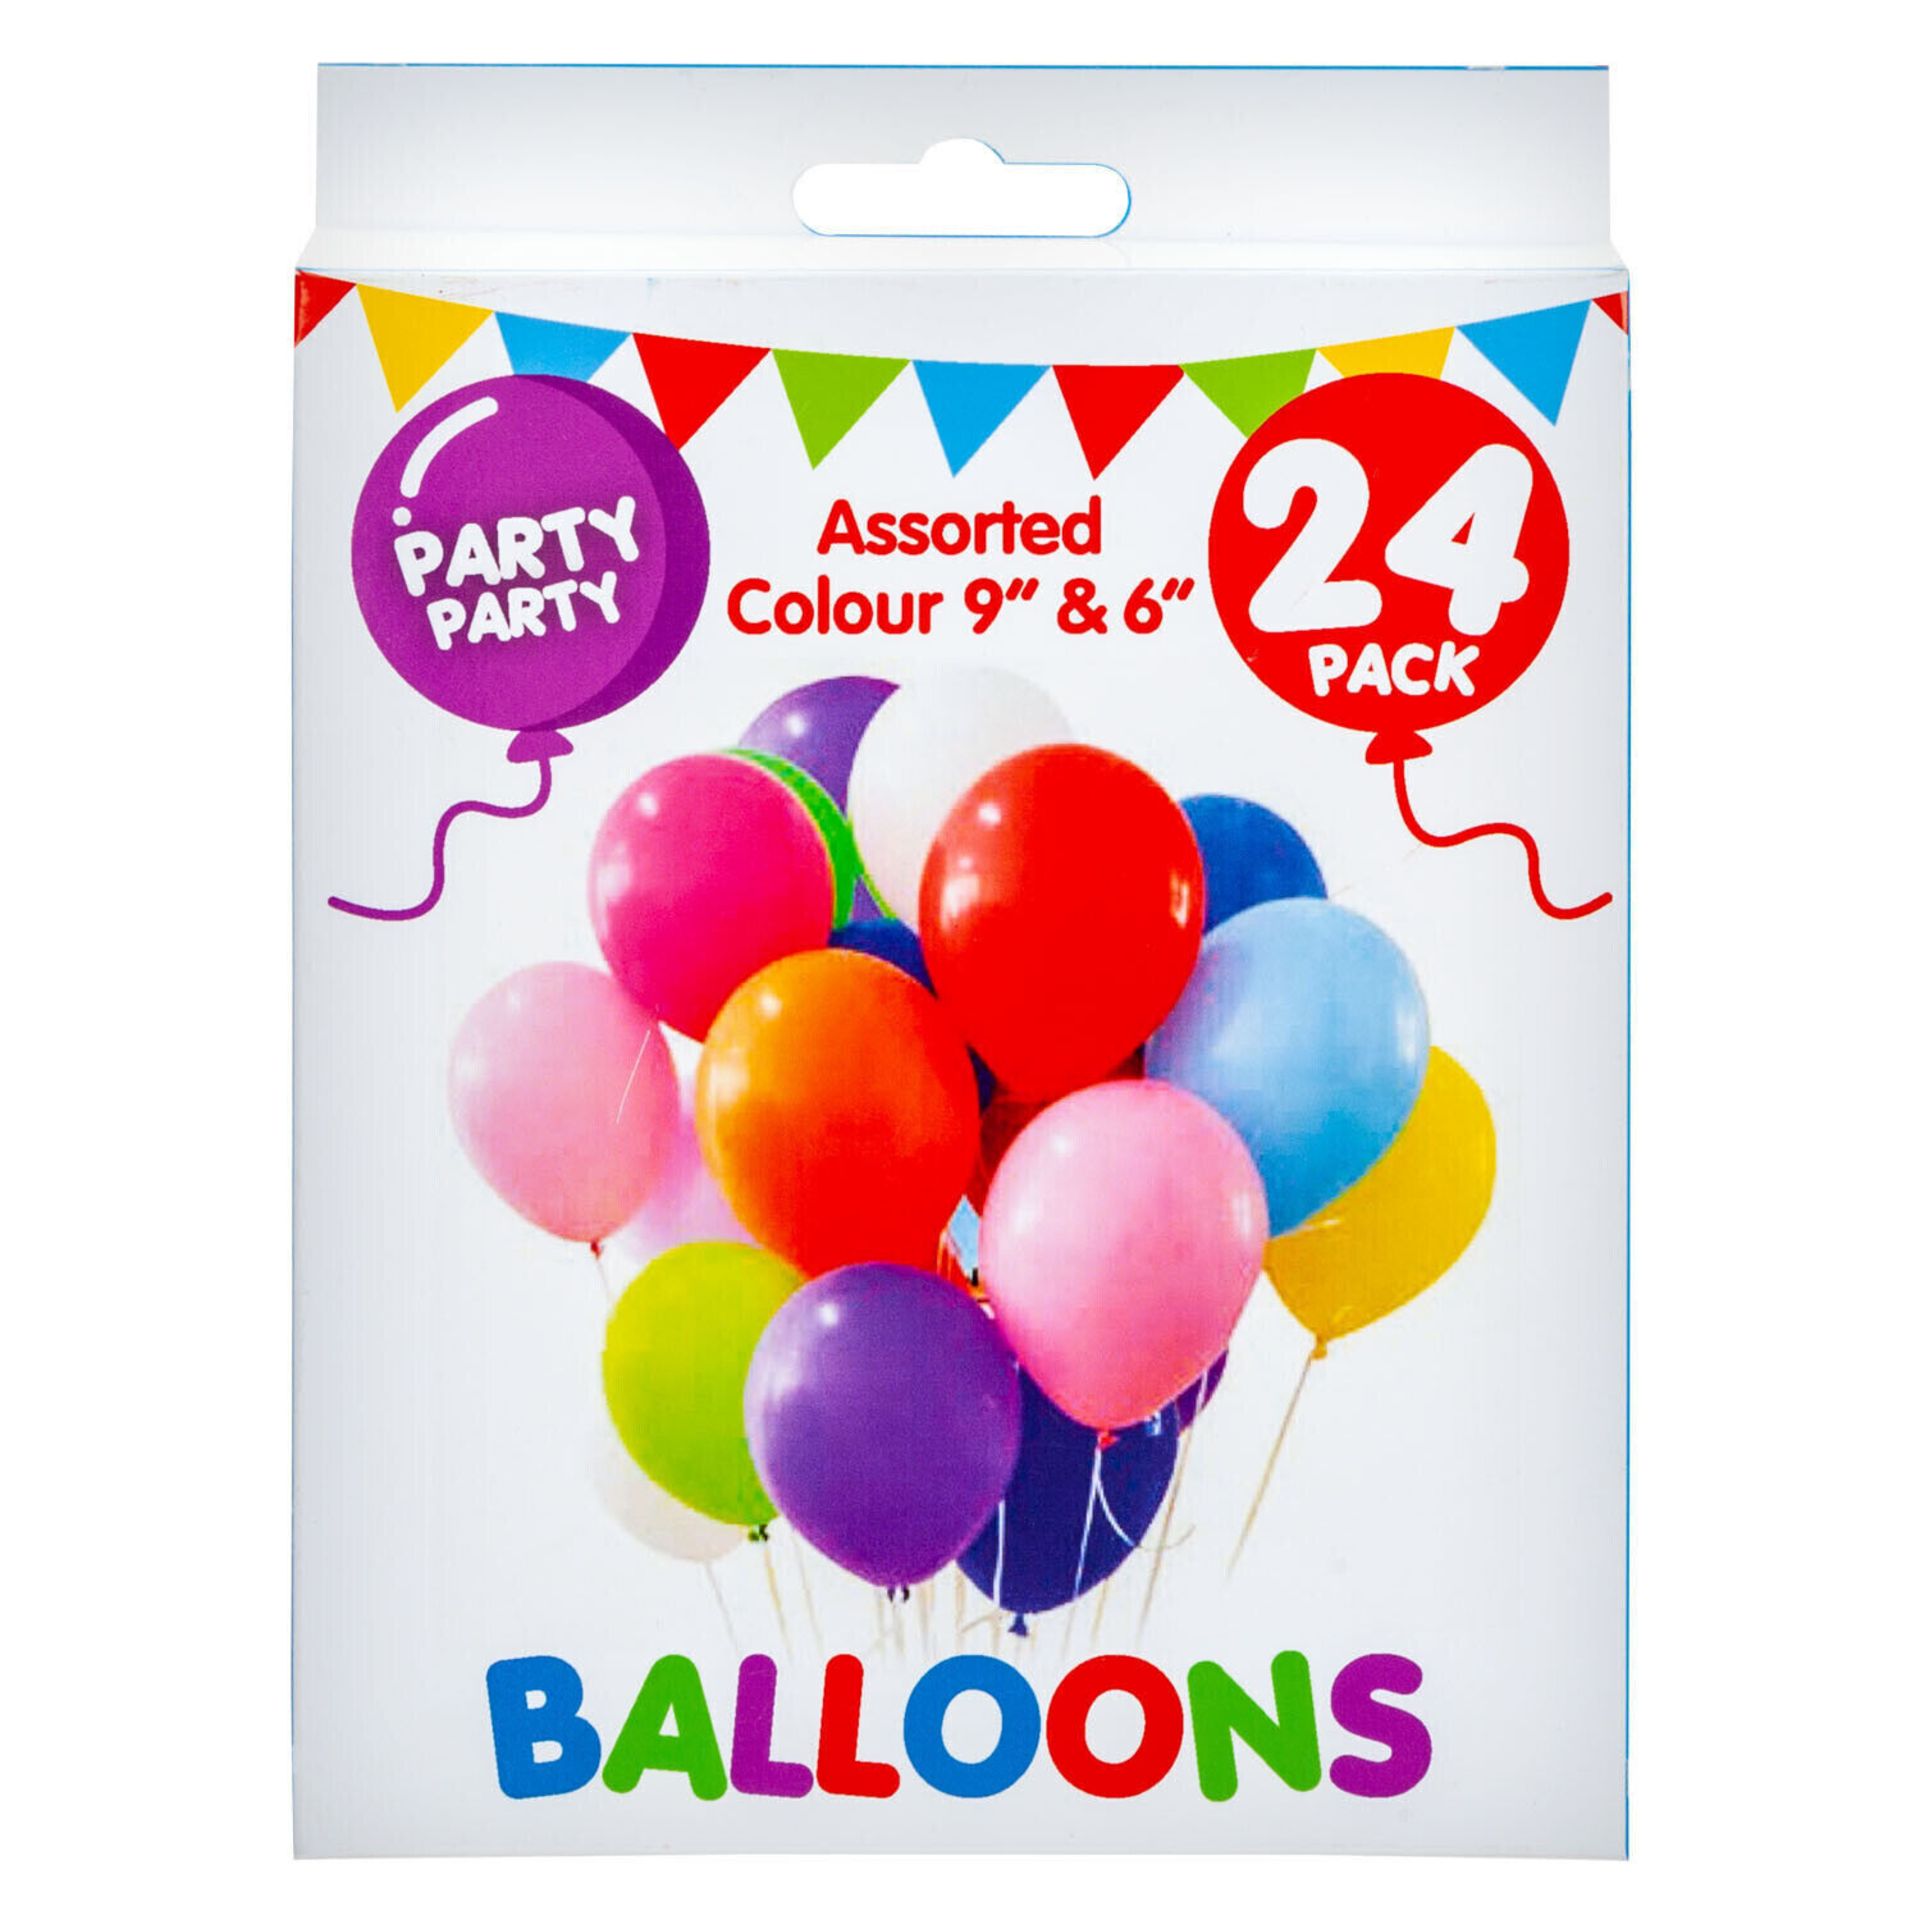 250 X NEW 9"&6" - 24 PACK ASSORTED COLOURED BALLOONS